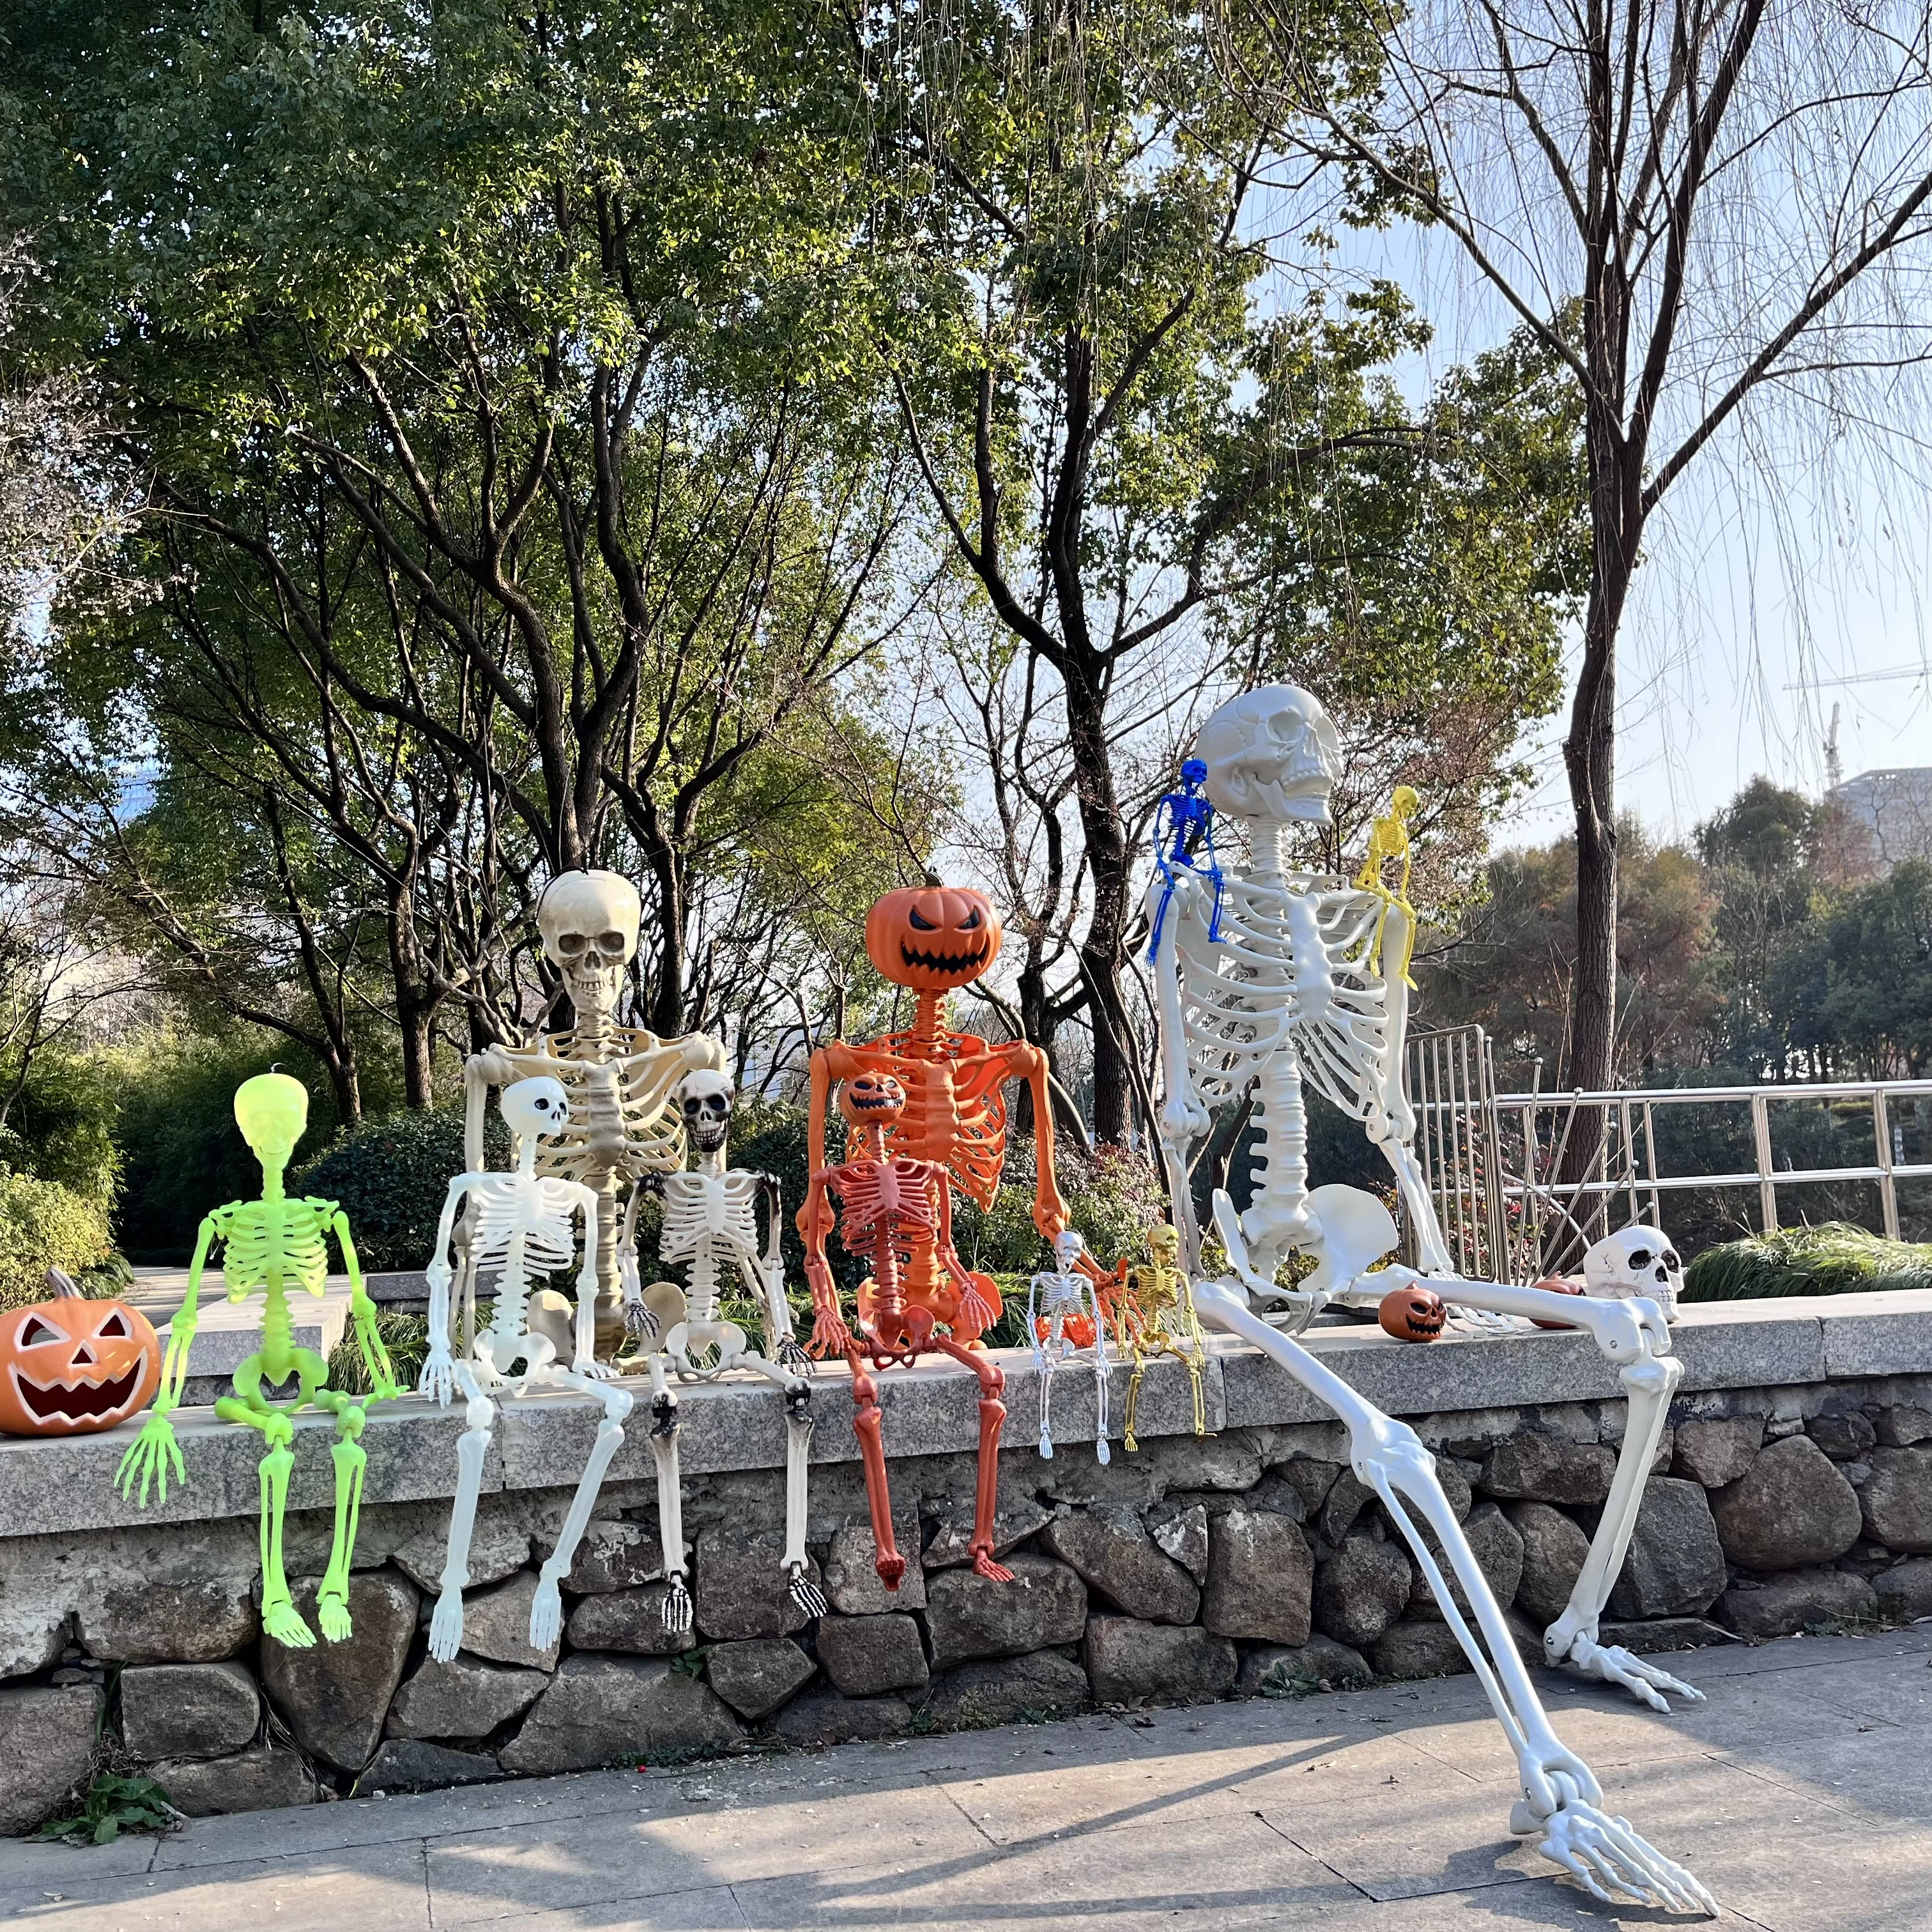 Halloween Prop Props Pose-N-Stay Life Size Pumpkin Posble Joints Human Halloween Skeletons For Holidays Decoration